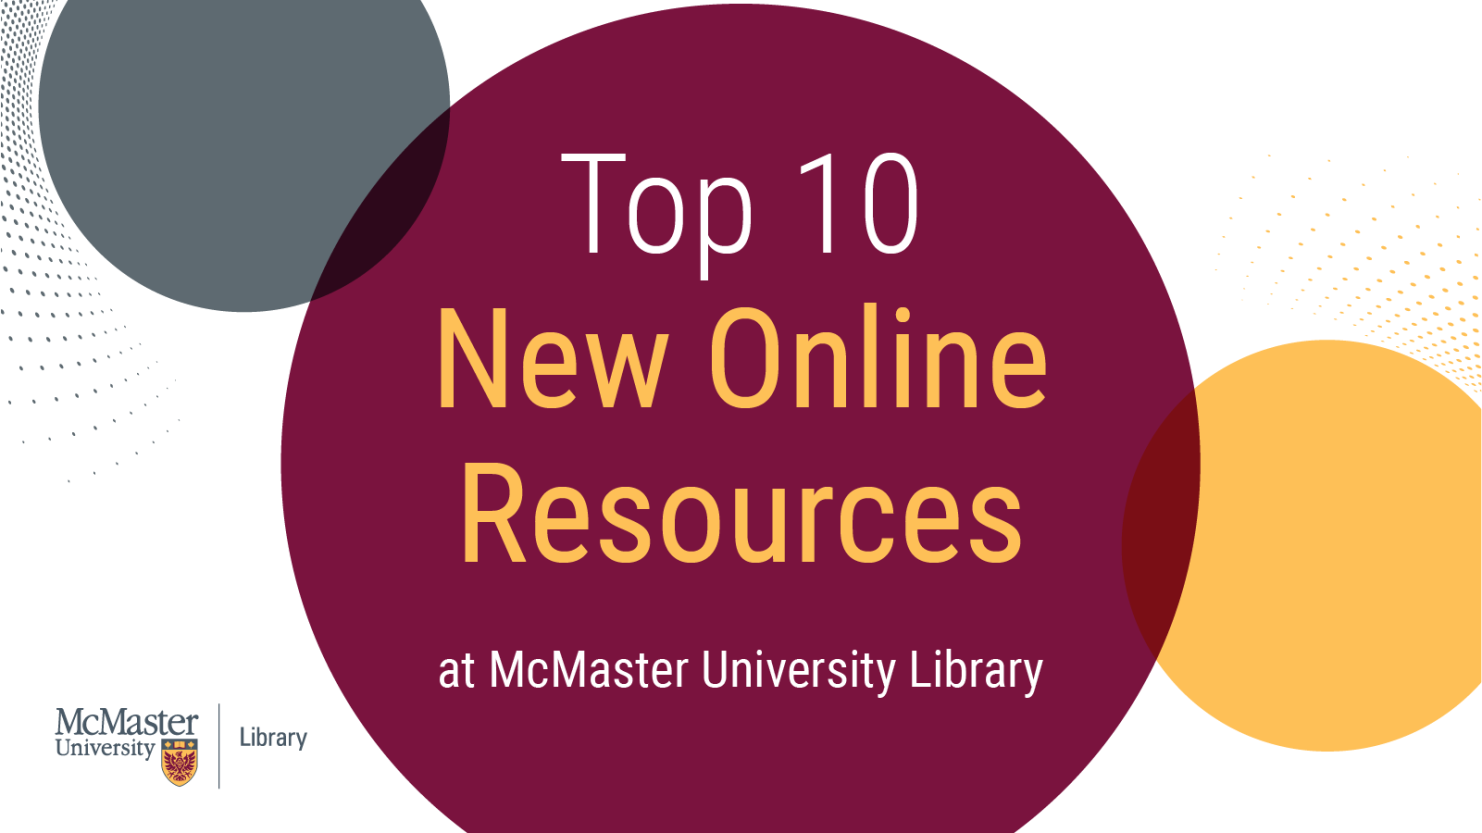 Maroon, Yellow, and Grey circles can be seen along with the McMaster University Library logo. Text reads: Top 10 New Online Resources at McMaster University Library.